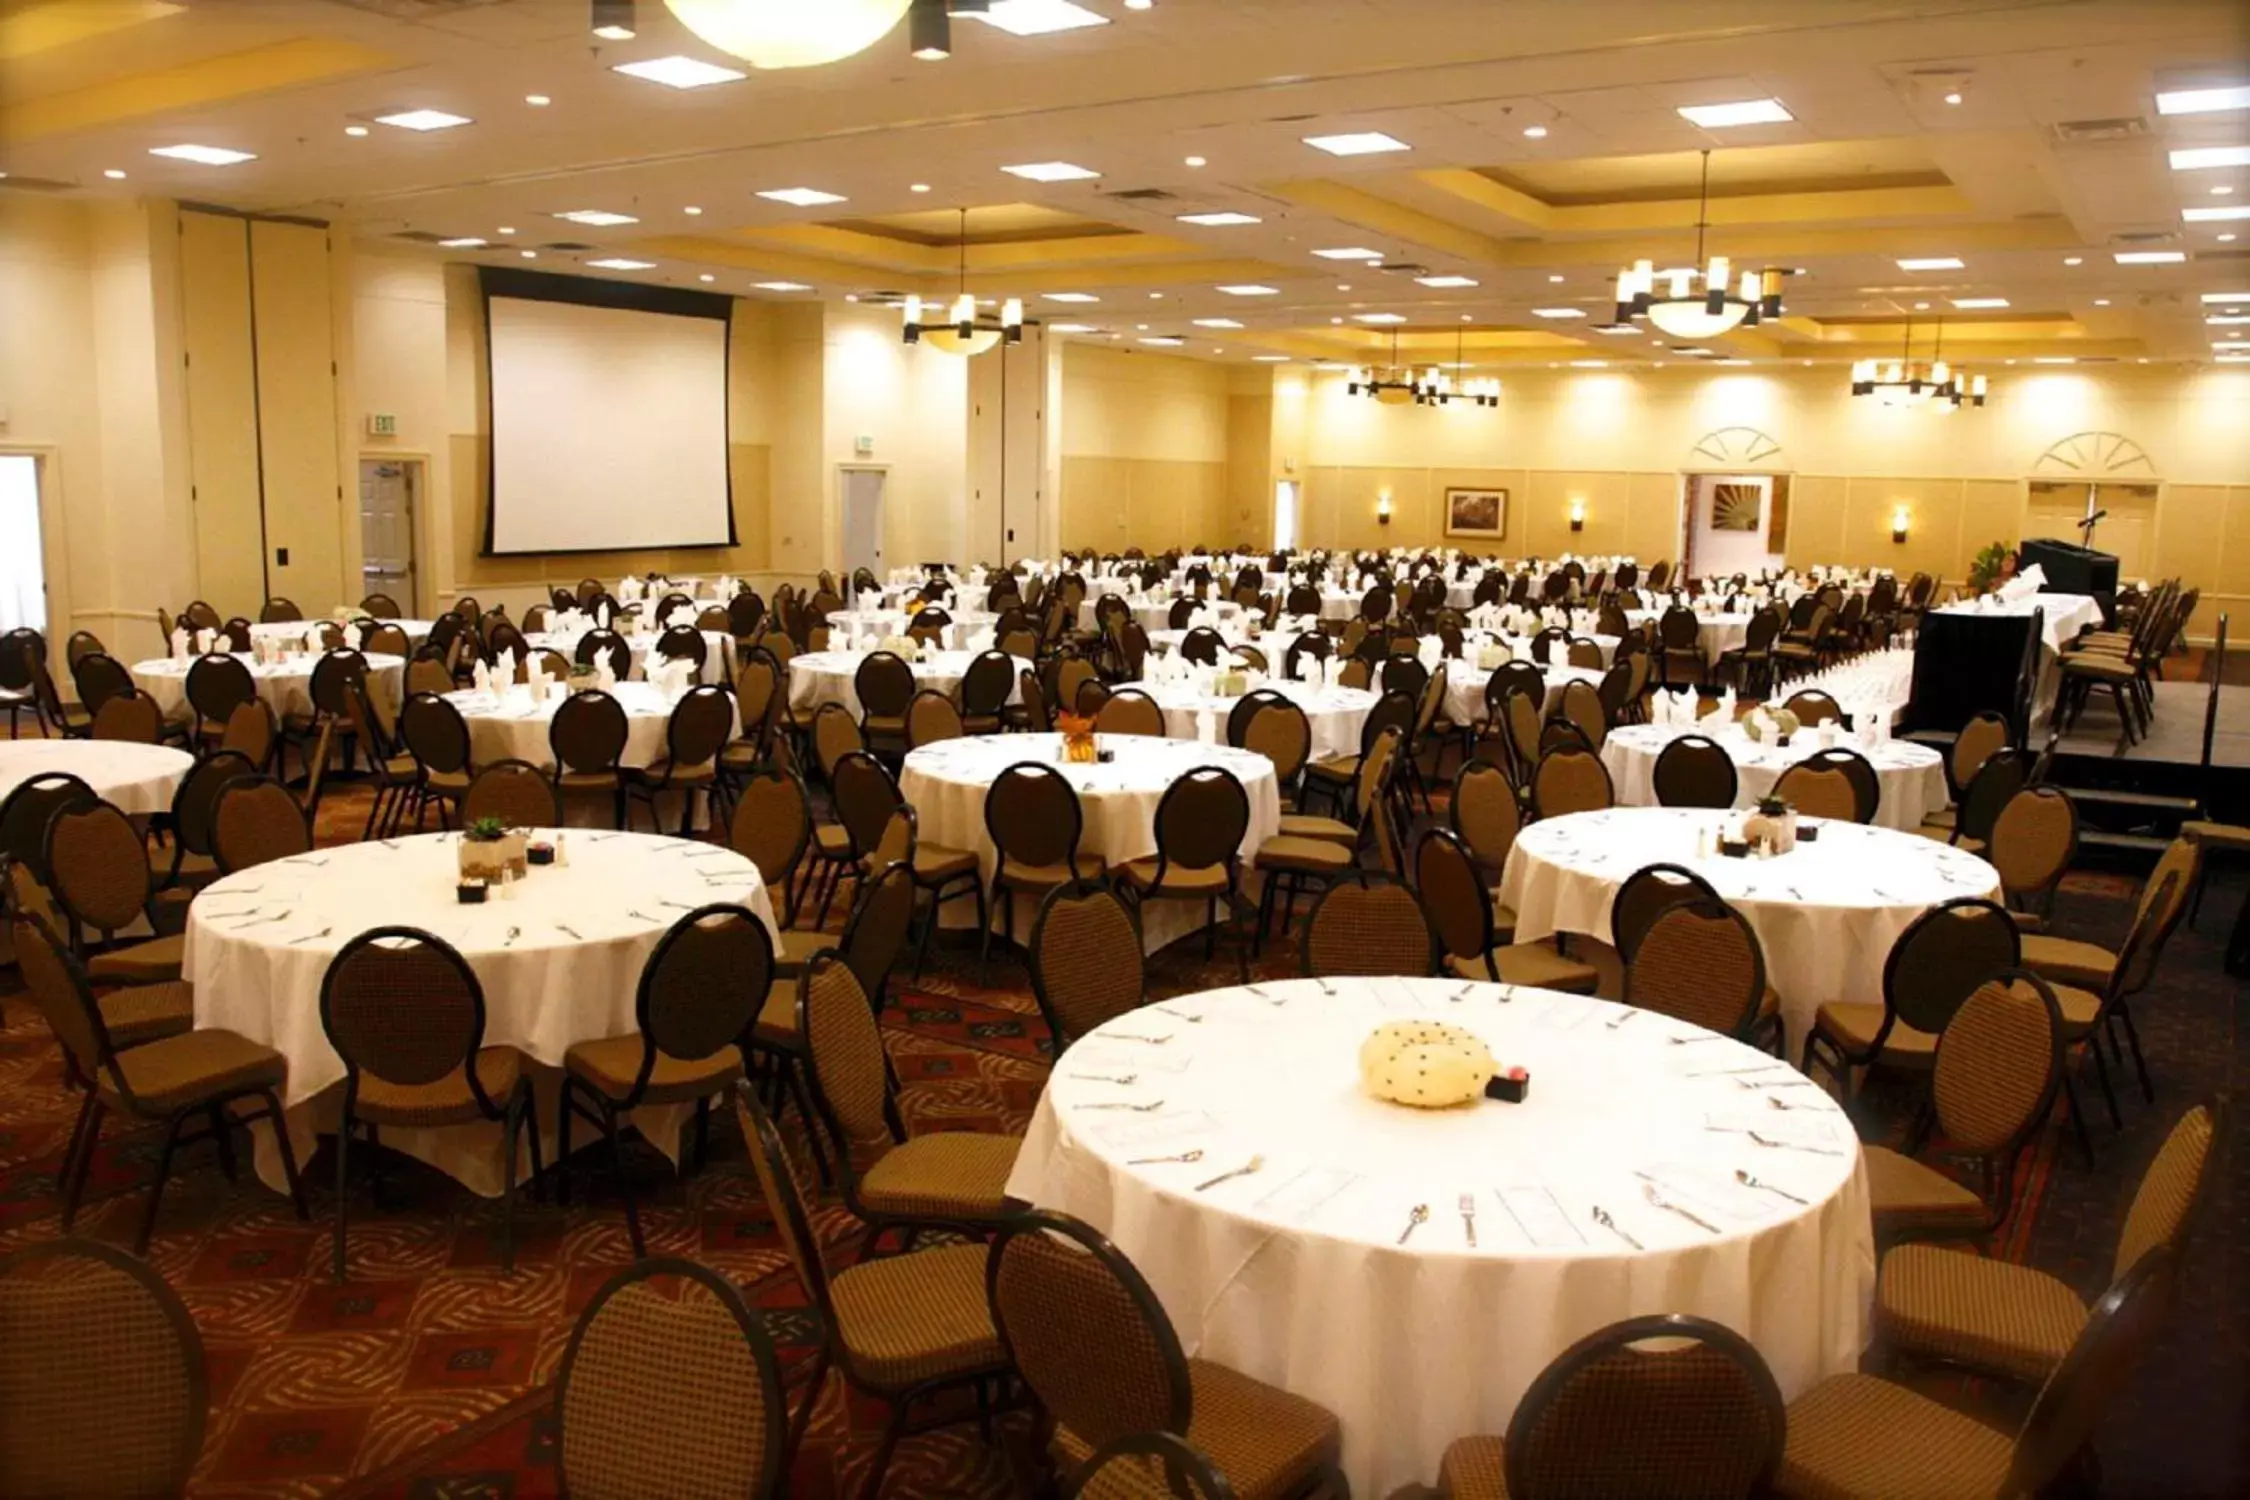 Meeting/conference room, Banquet Facilities in Hilton Garden Inn Albany